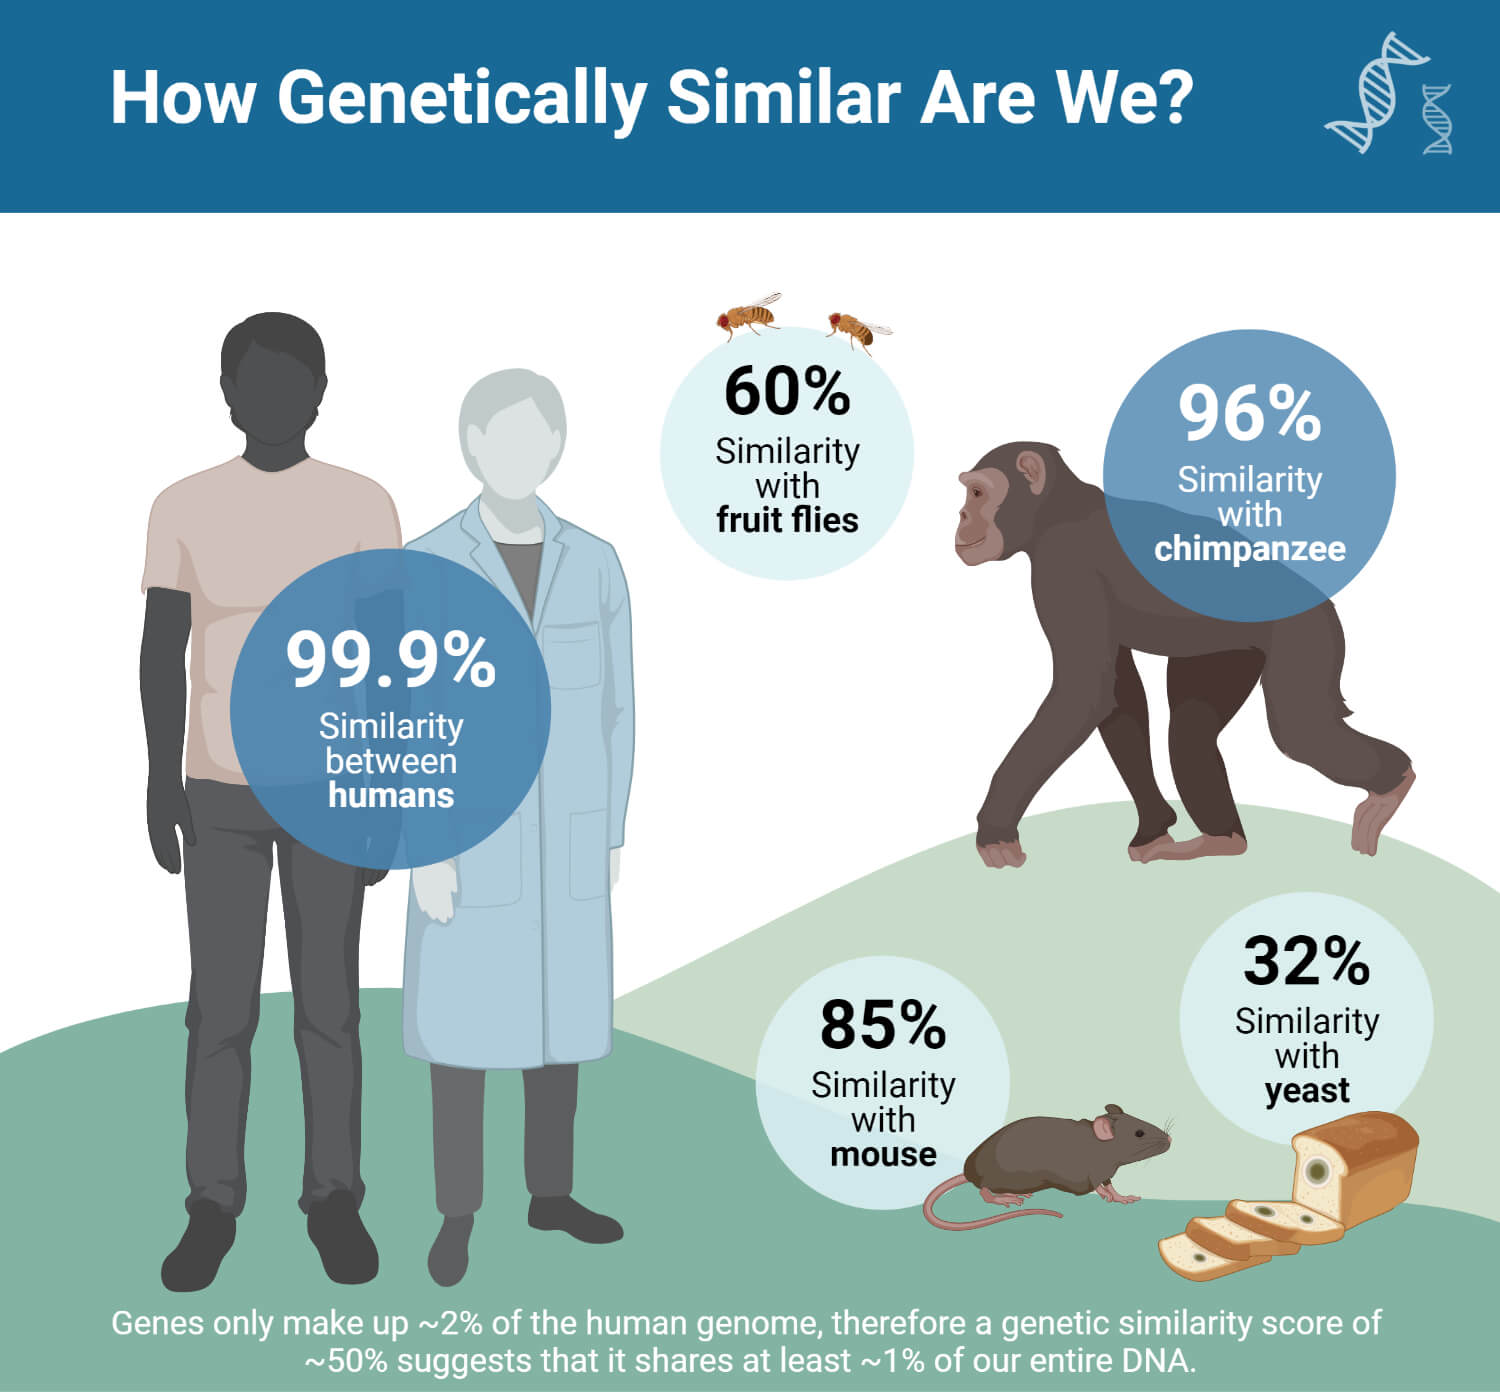 How Genetically Similar Are We